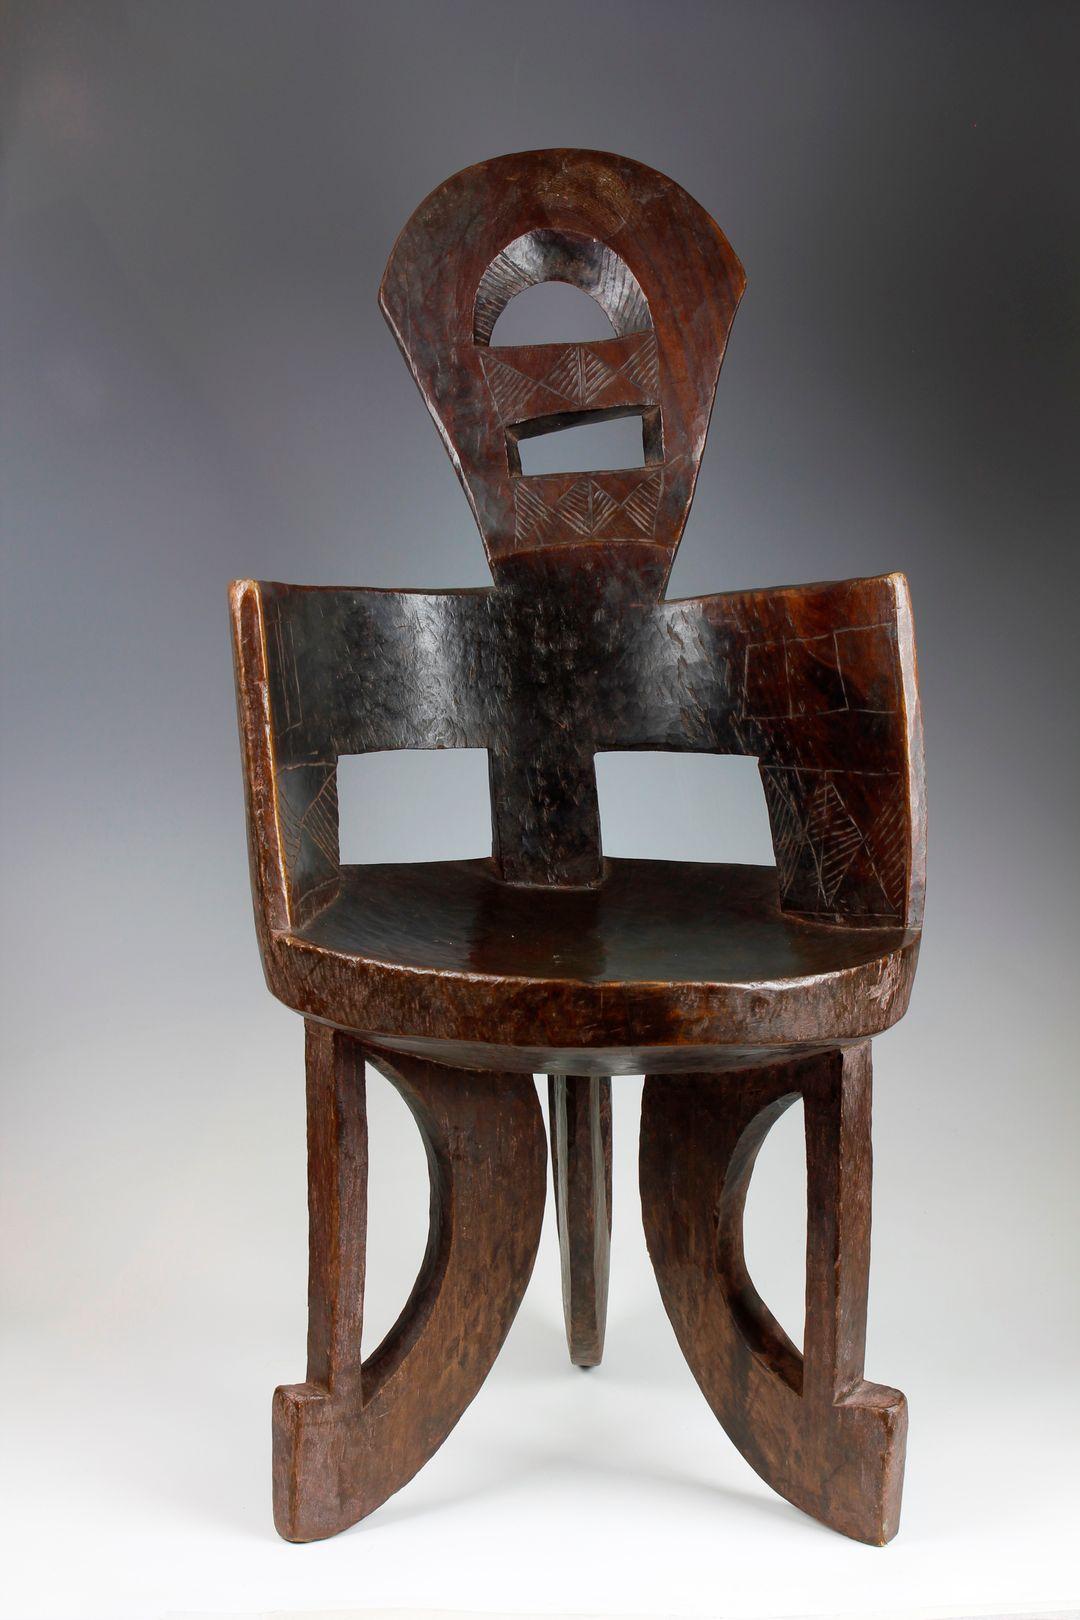 This late nineteenth-century chair, from the Gindabarat in the Oromia region of Ethiopia, has been finely carved from a single piece of dense, heavy wood. The circular, narrow-in-size seat is supported by three legs, which each feature an upright